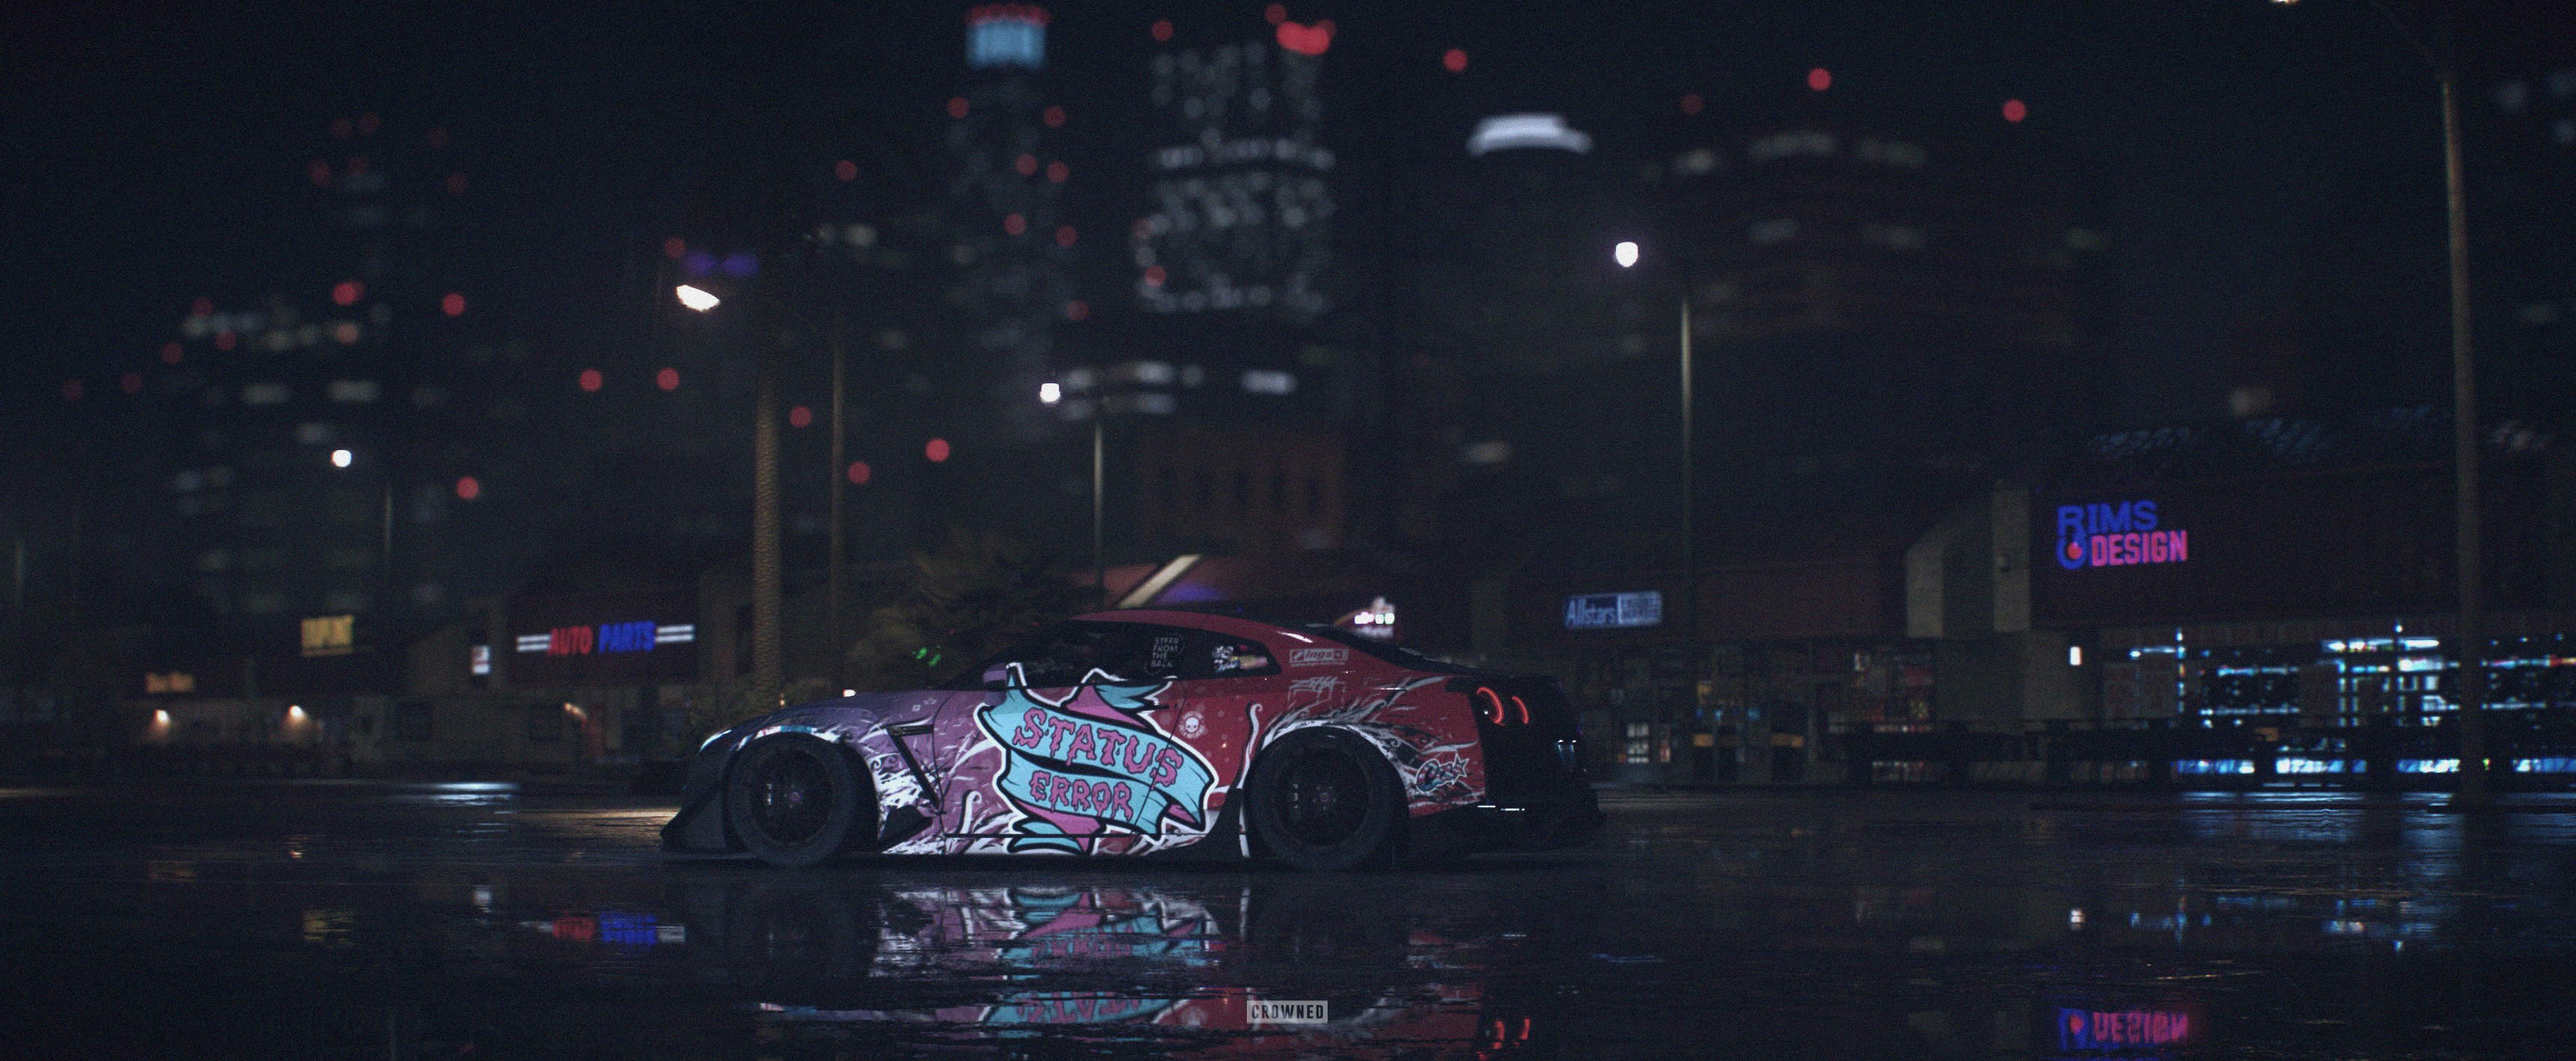 General 3440x1417 CROWNED Need for Speed Nissan GT-R video games Nissan Japanese cars Electronic Arts